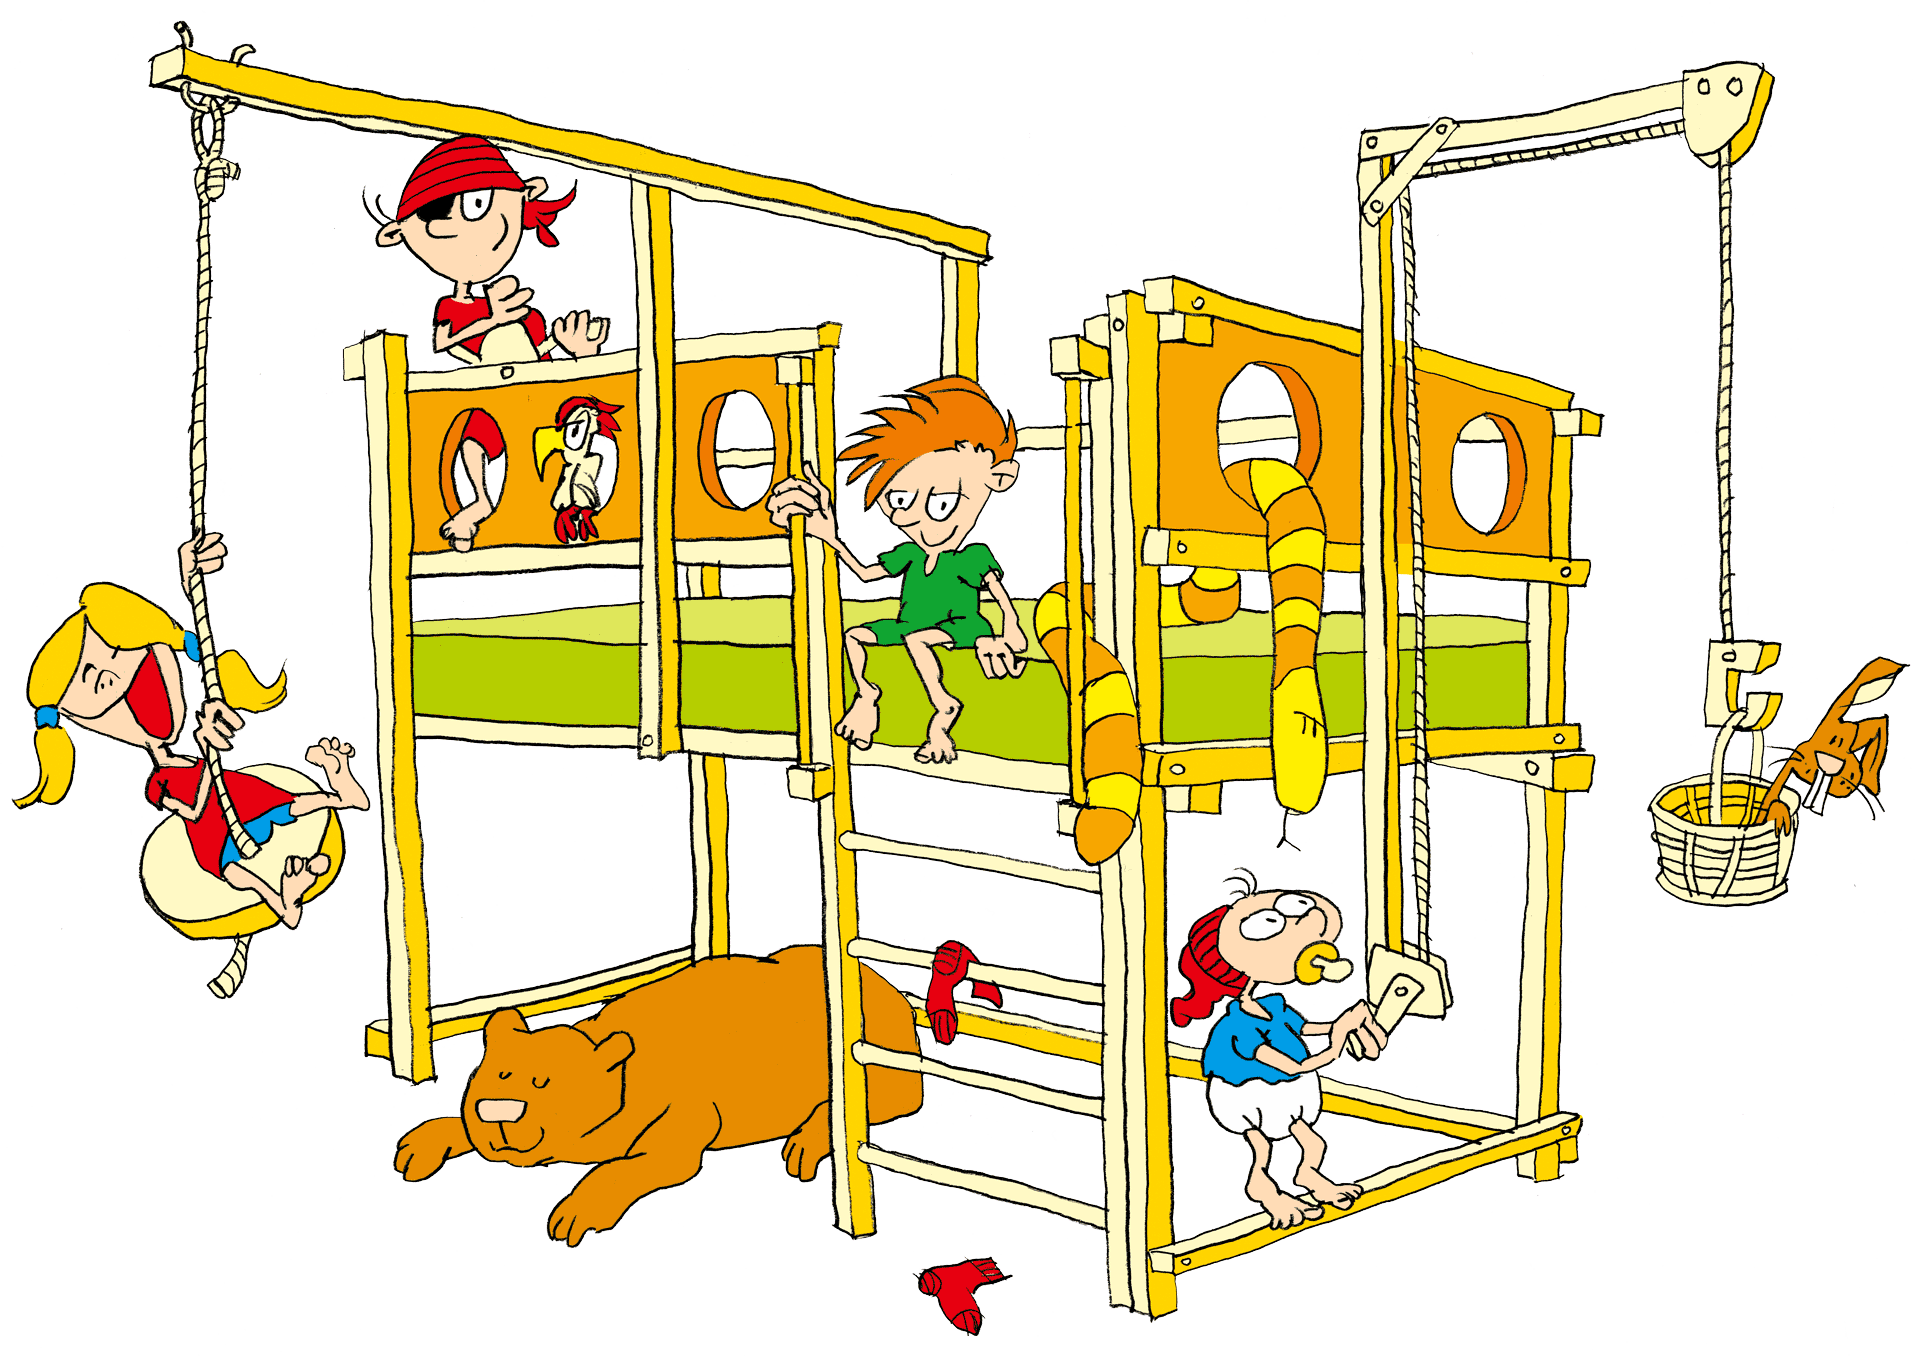 Play Beds and Adventure Beds